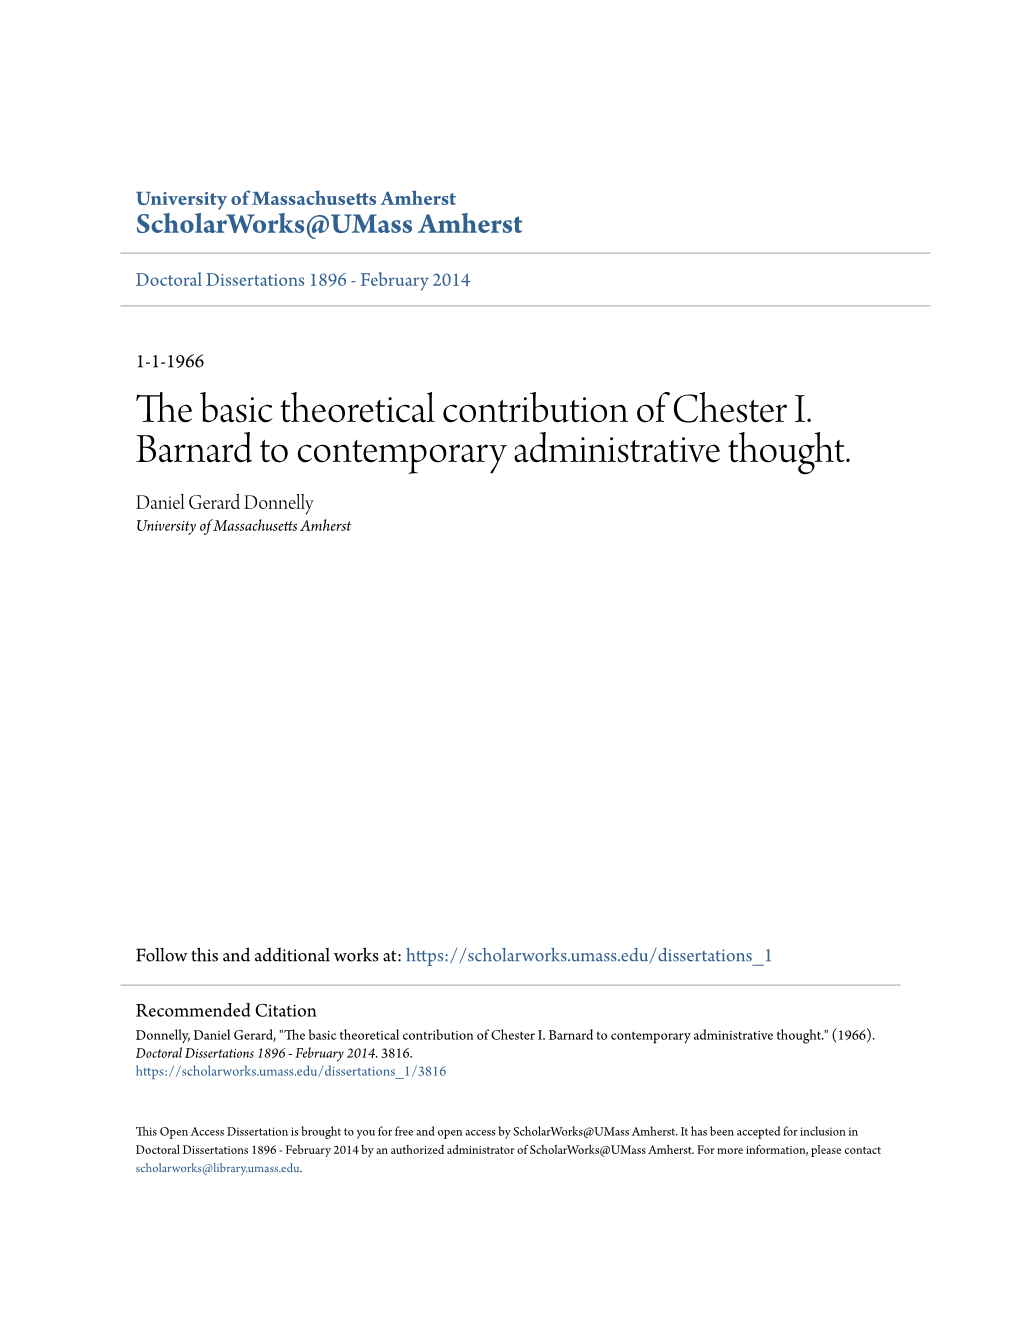 The Basic Theoretical Contribution of Chester I. Barnard to Contemporary Administrative Thought